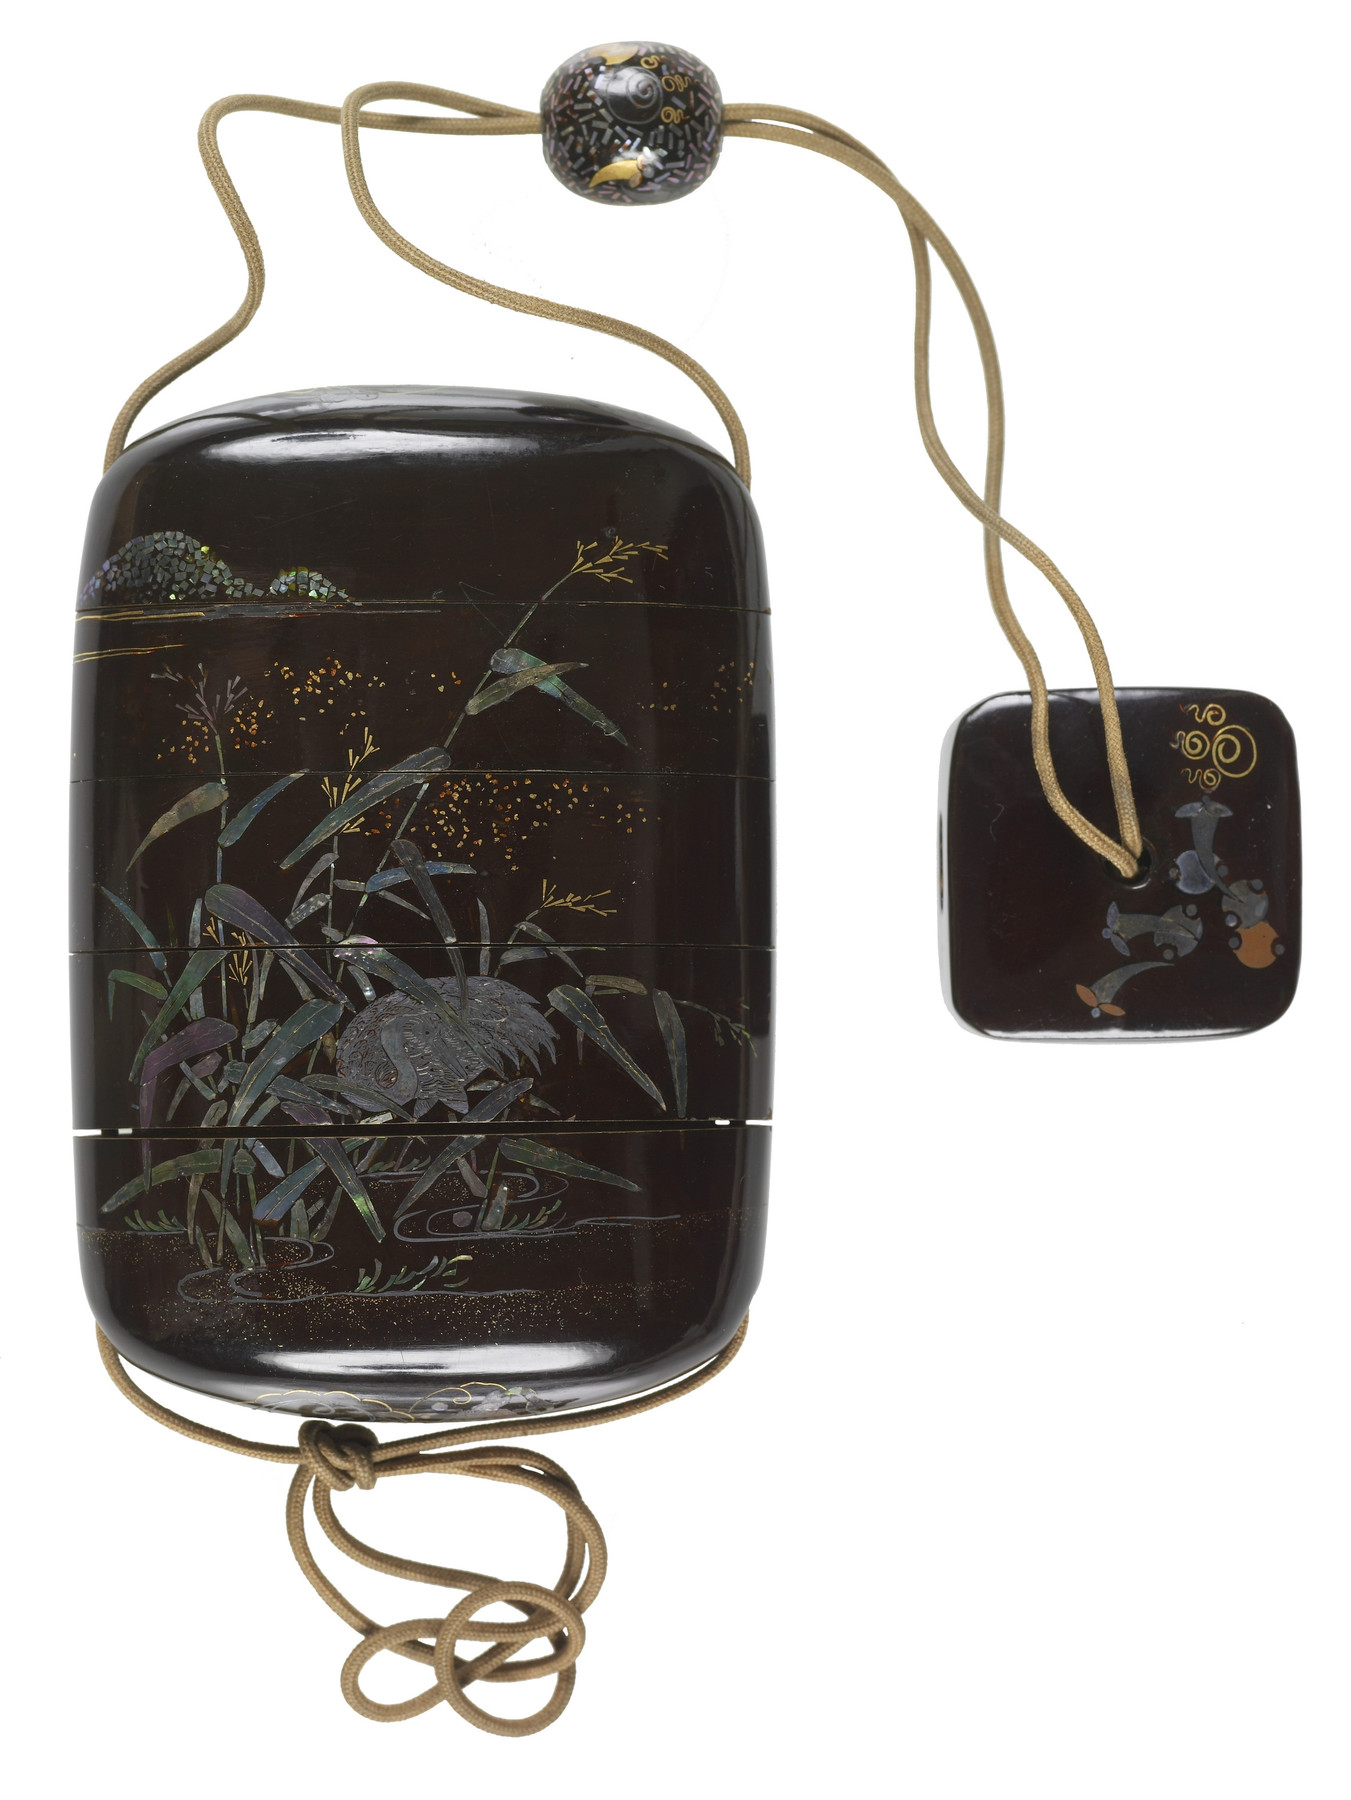 Image for Inro with Cranes in a Stream and the Moon Rising; Netsuke with Flowering Plants